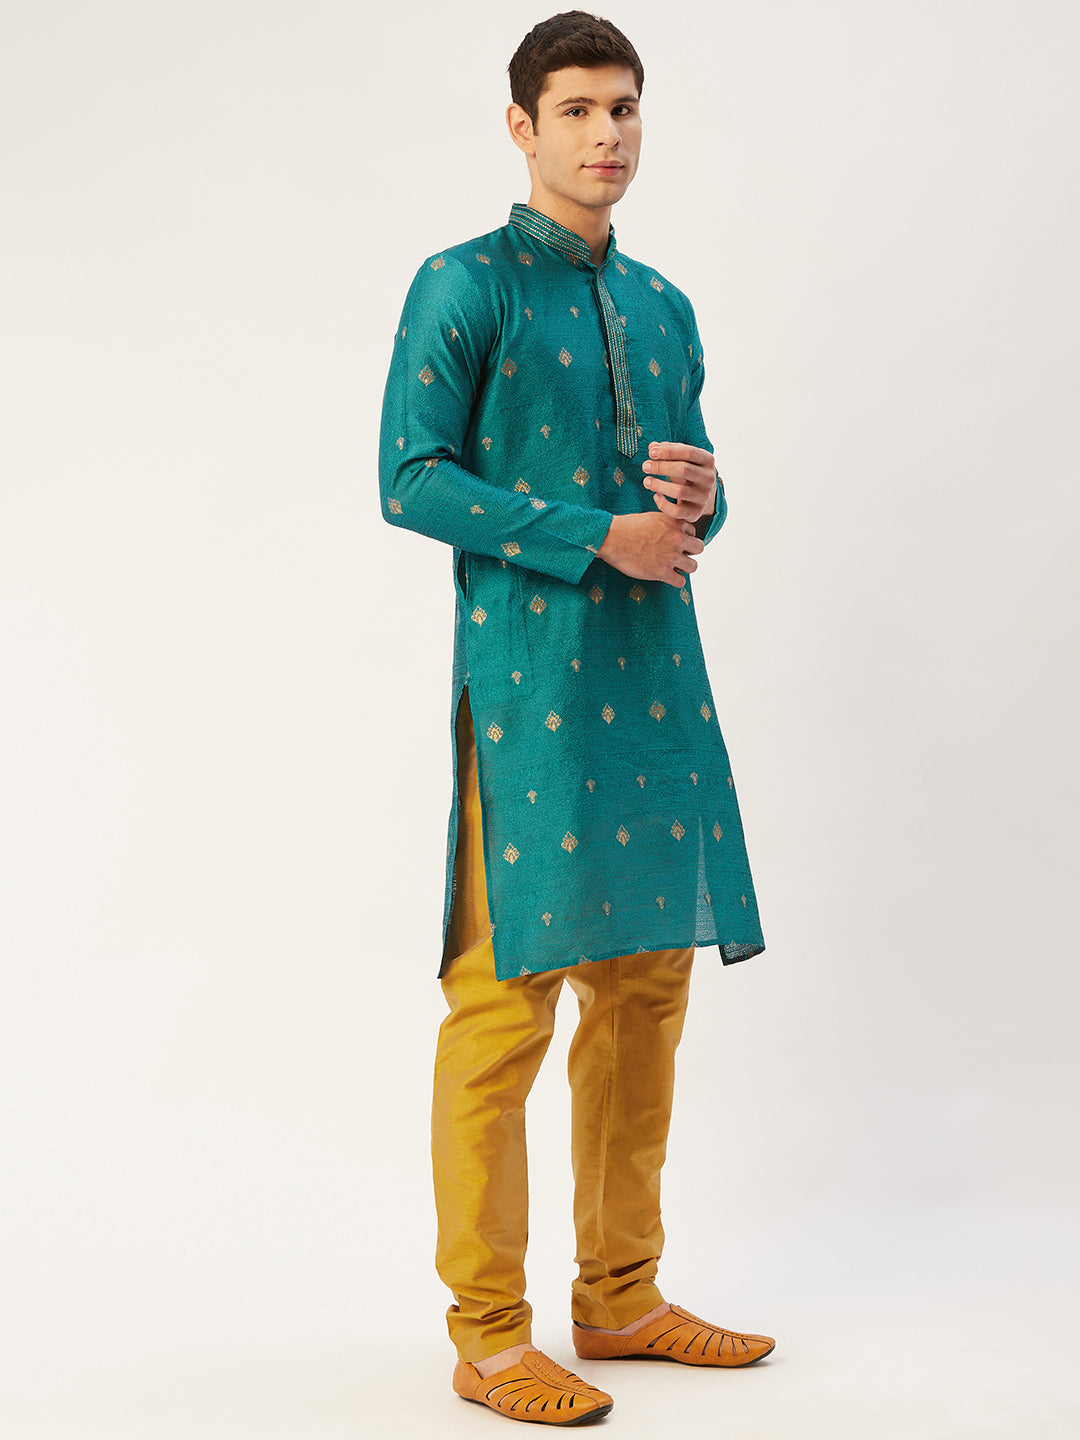 Jompers Men's Teal Coller Embroidered Woven Design Kurta Only